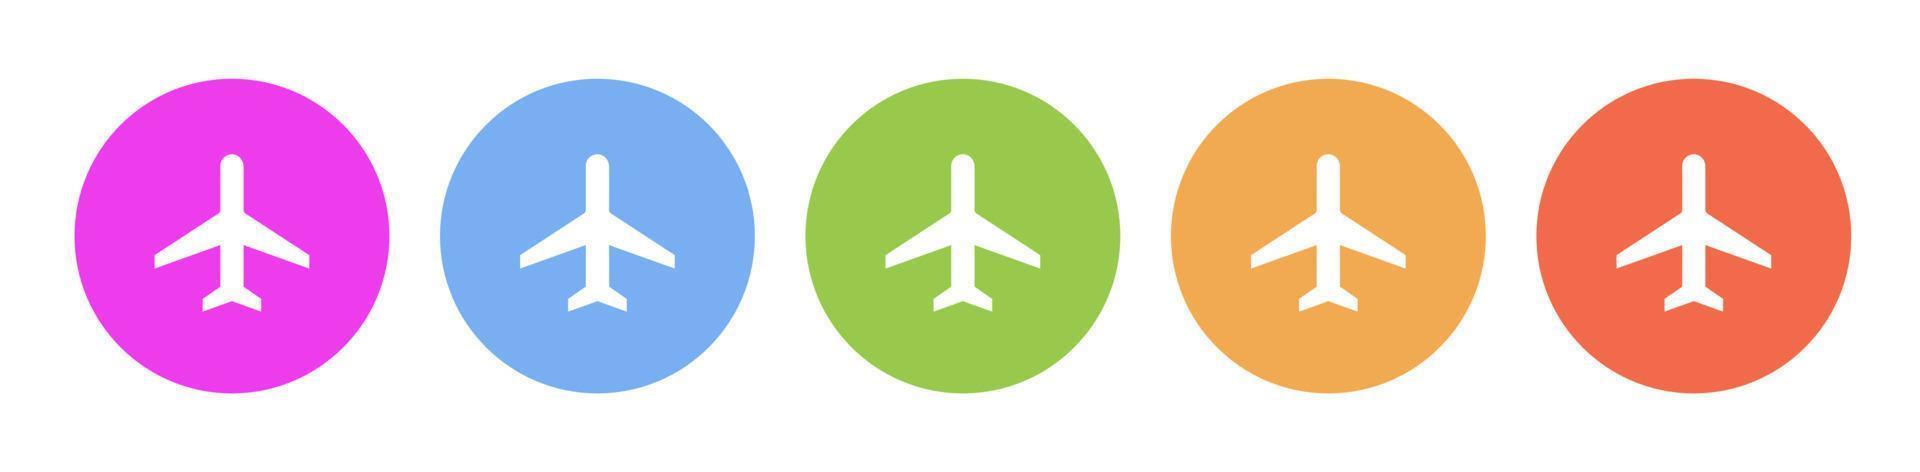 Multi colored flat icons on round backgrounds. Plane multicolor circle vector icon on white background